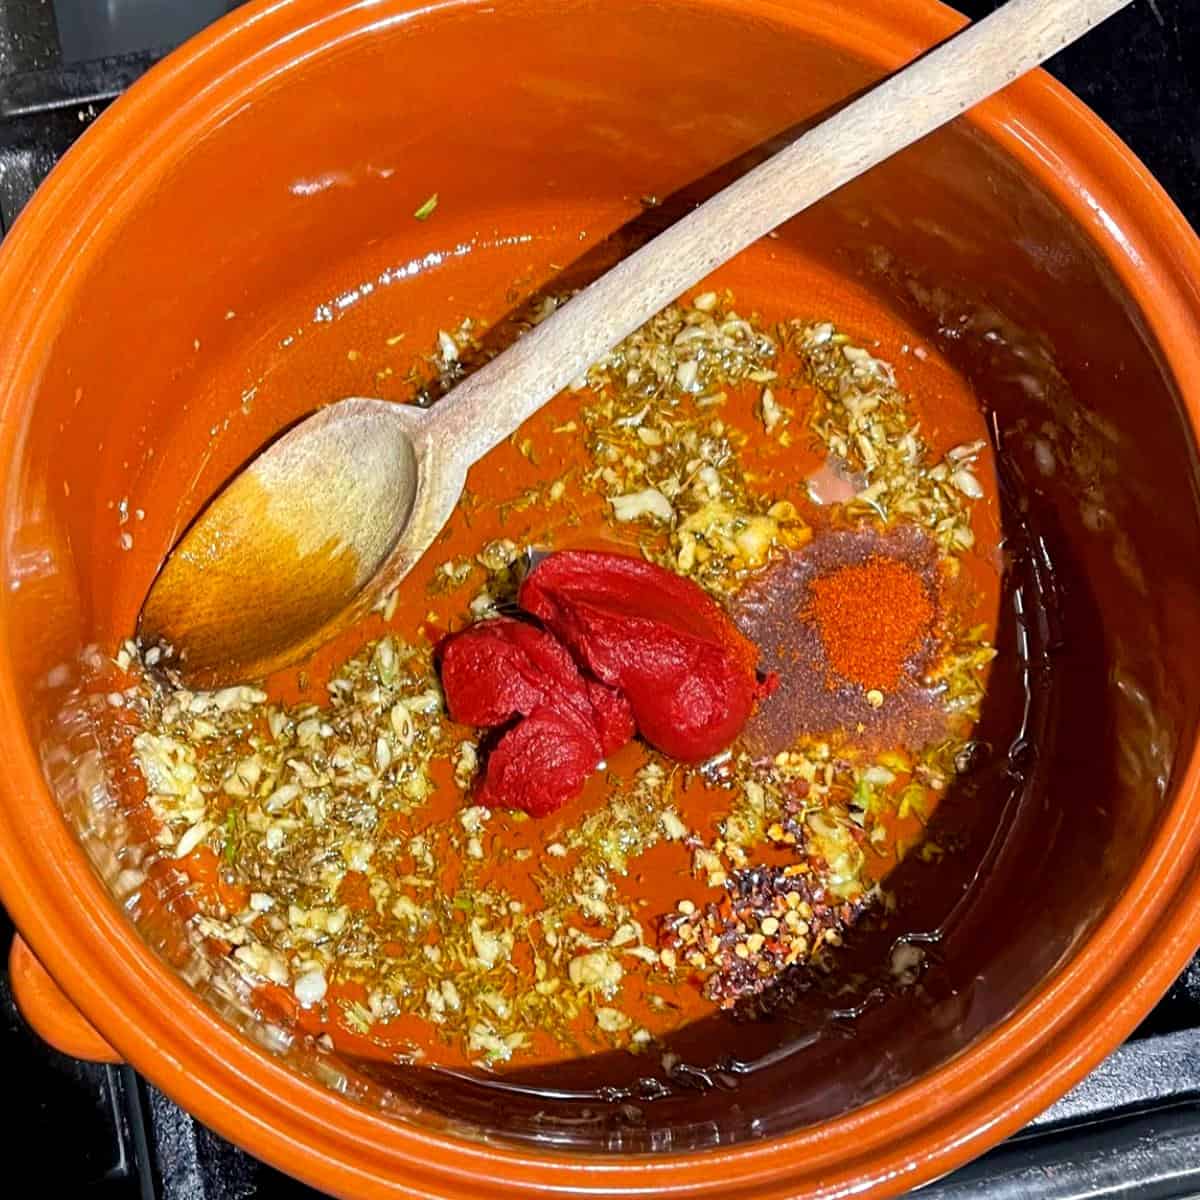 Tomato paste, paprika and red pepper flakes added to pot with garlic and cumin.